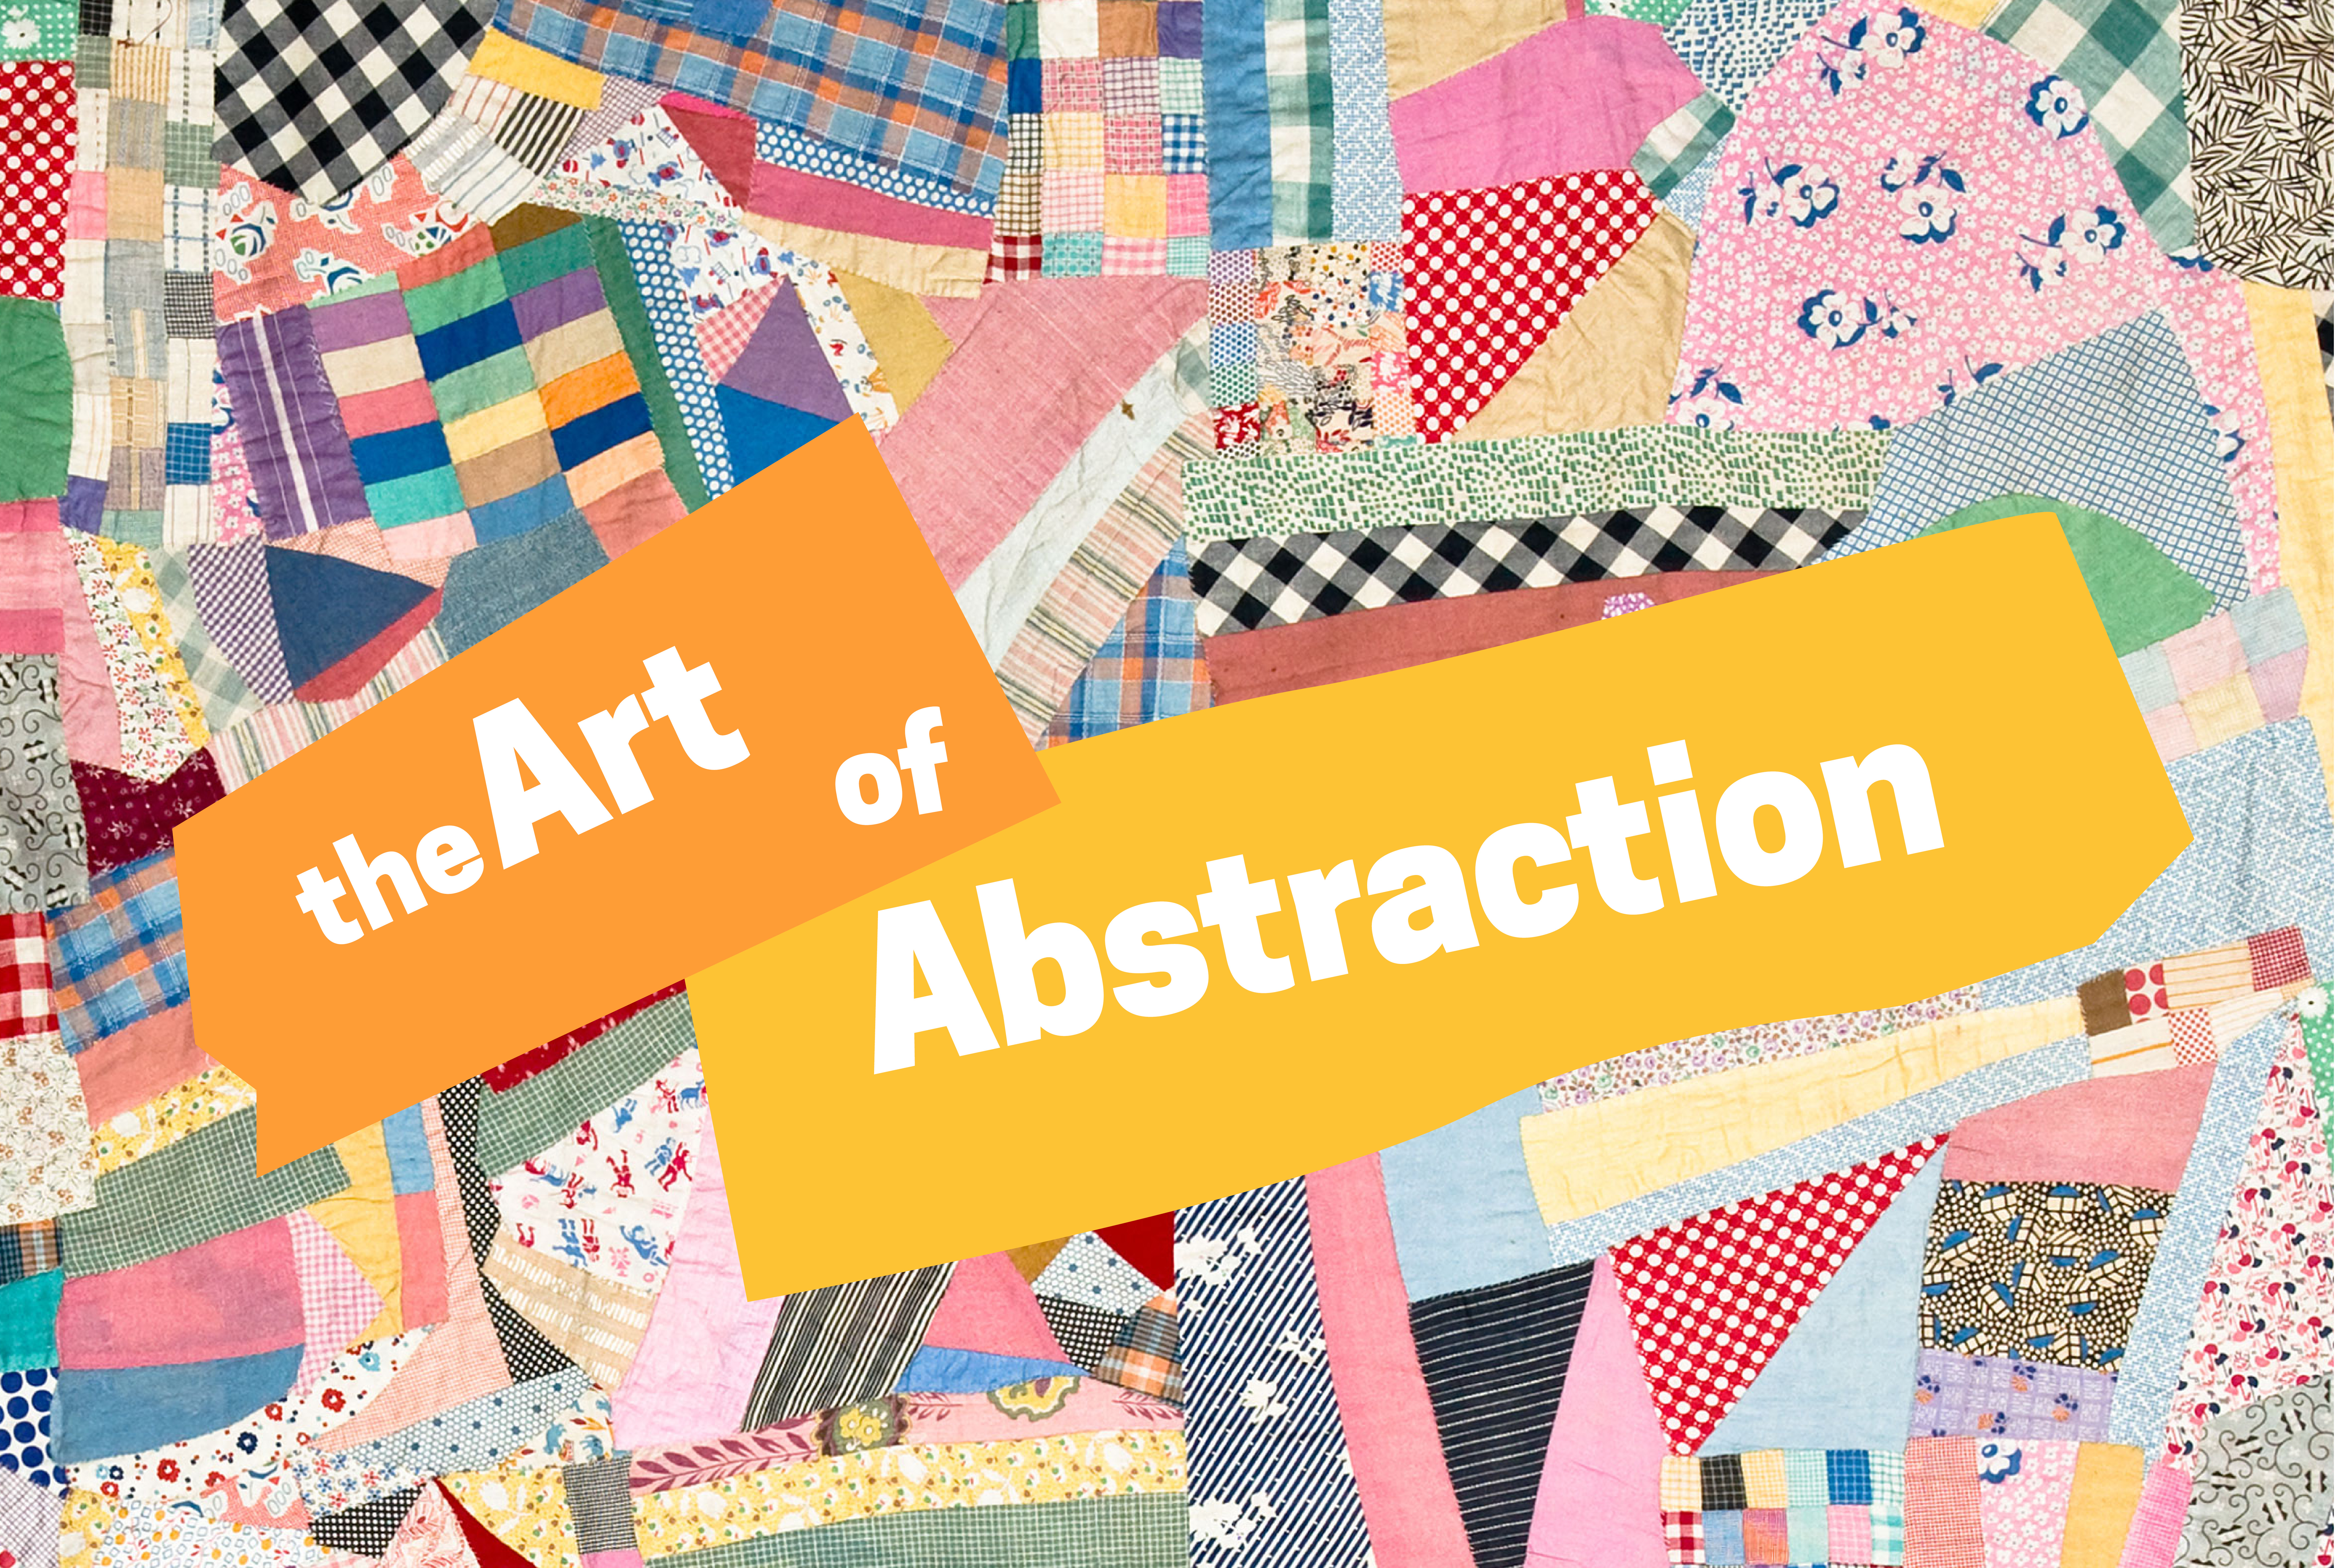 The Art of Abstraction: Sketching in the Historic Textiles Gallery